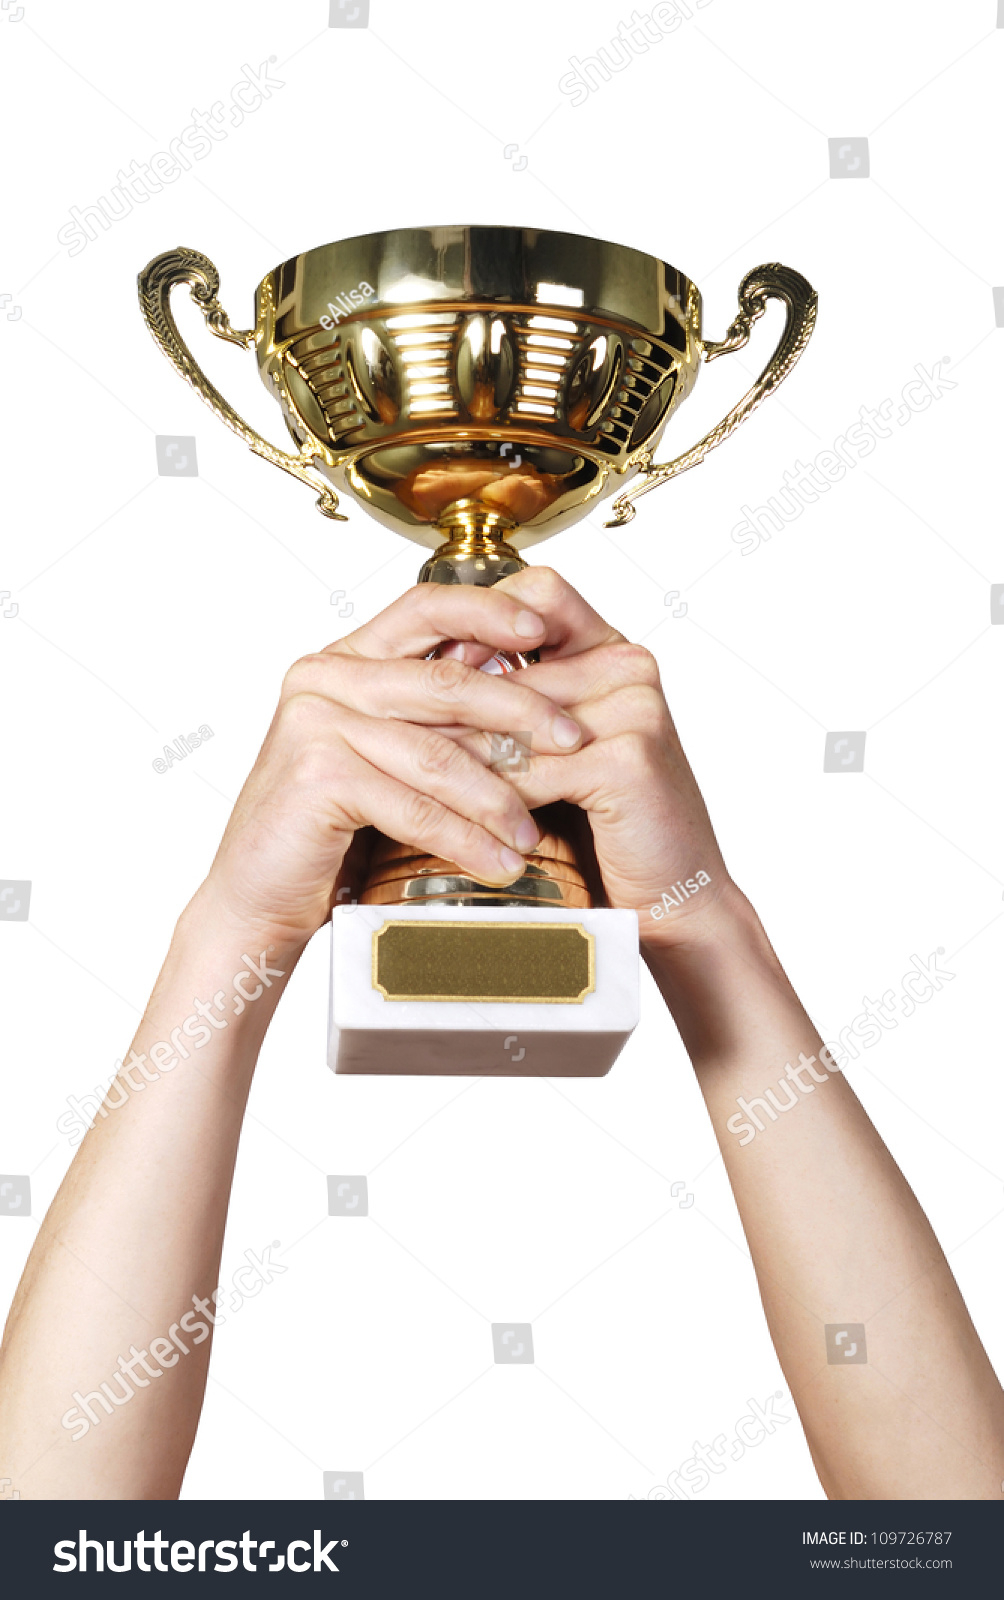 stock-photo-man-holding-a-champion-golden-trophy-on-white-background-109726787.jpg